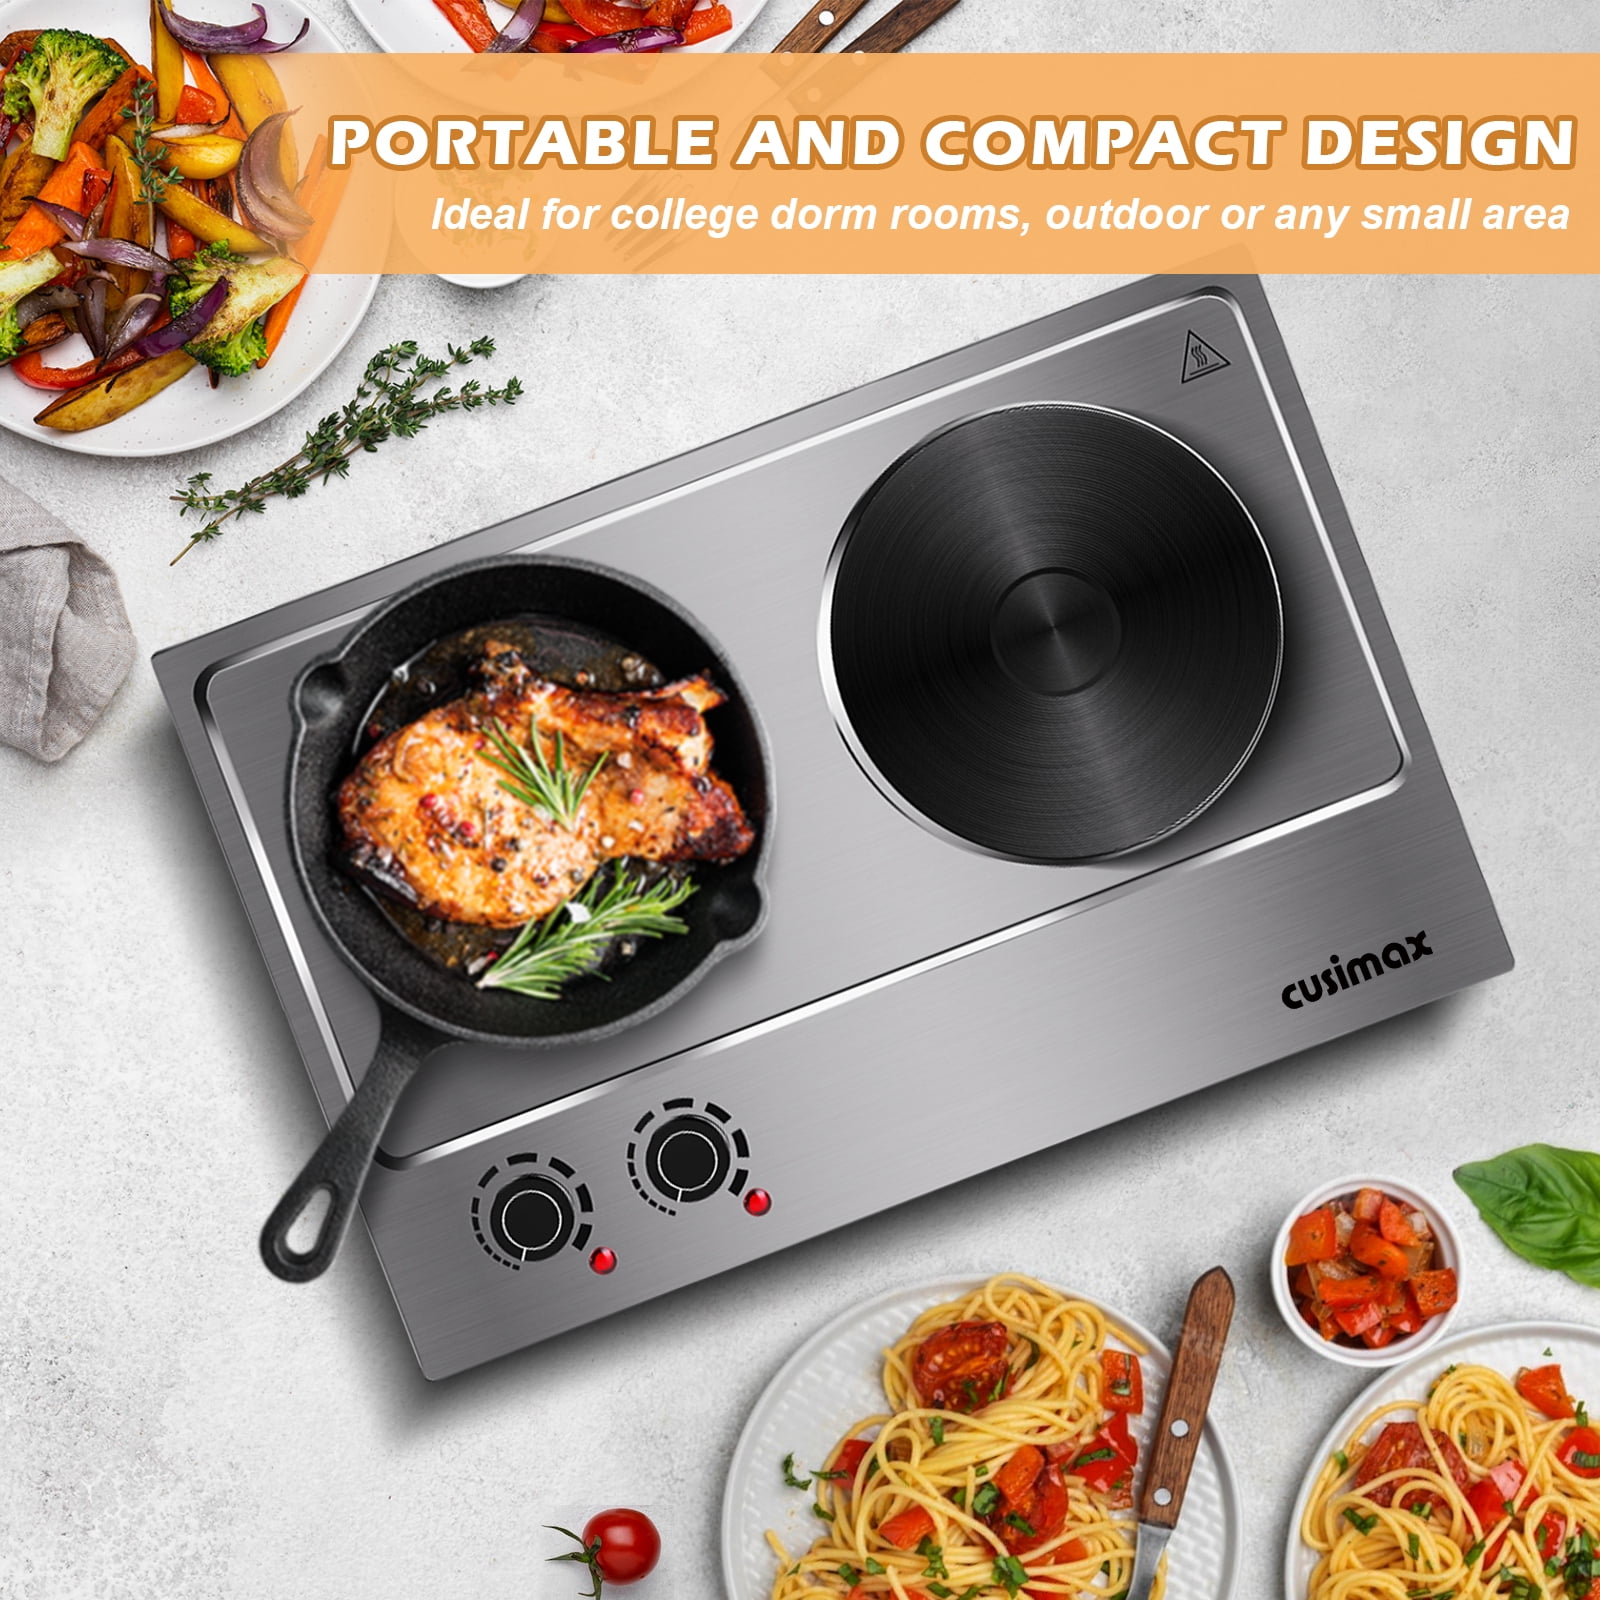 Cusimax 900W+900W Double Hot Plate, Portable Electric Double Burner  Cooktop, Cast Iron Hot Plates for Cooking, Black Stainless Steel Countertop  Burner 